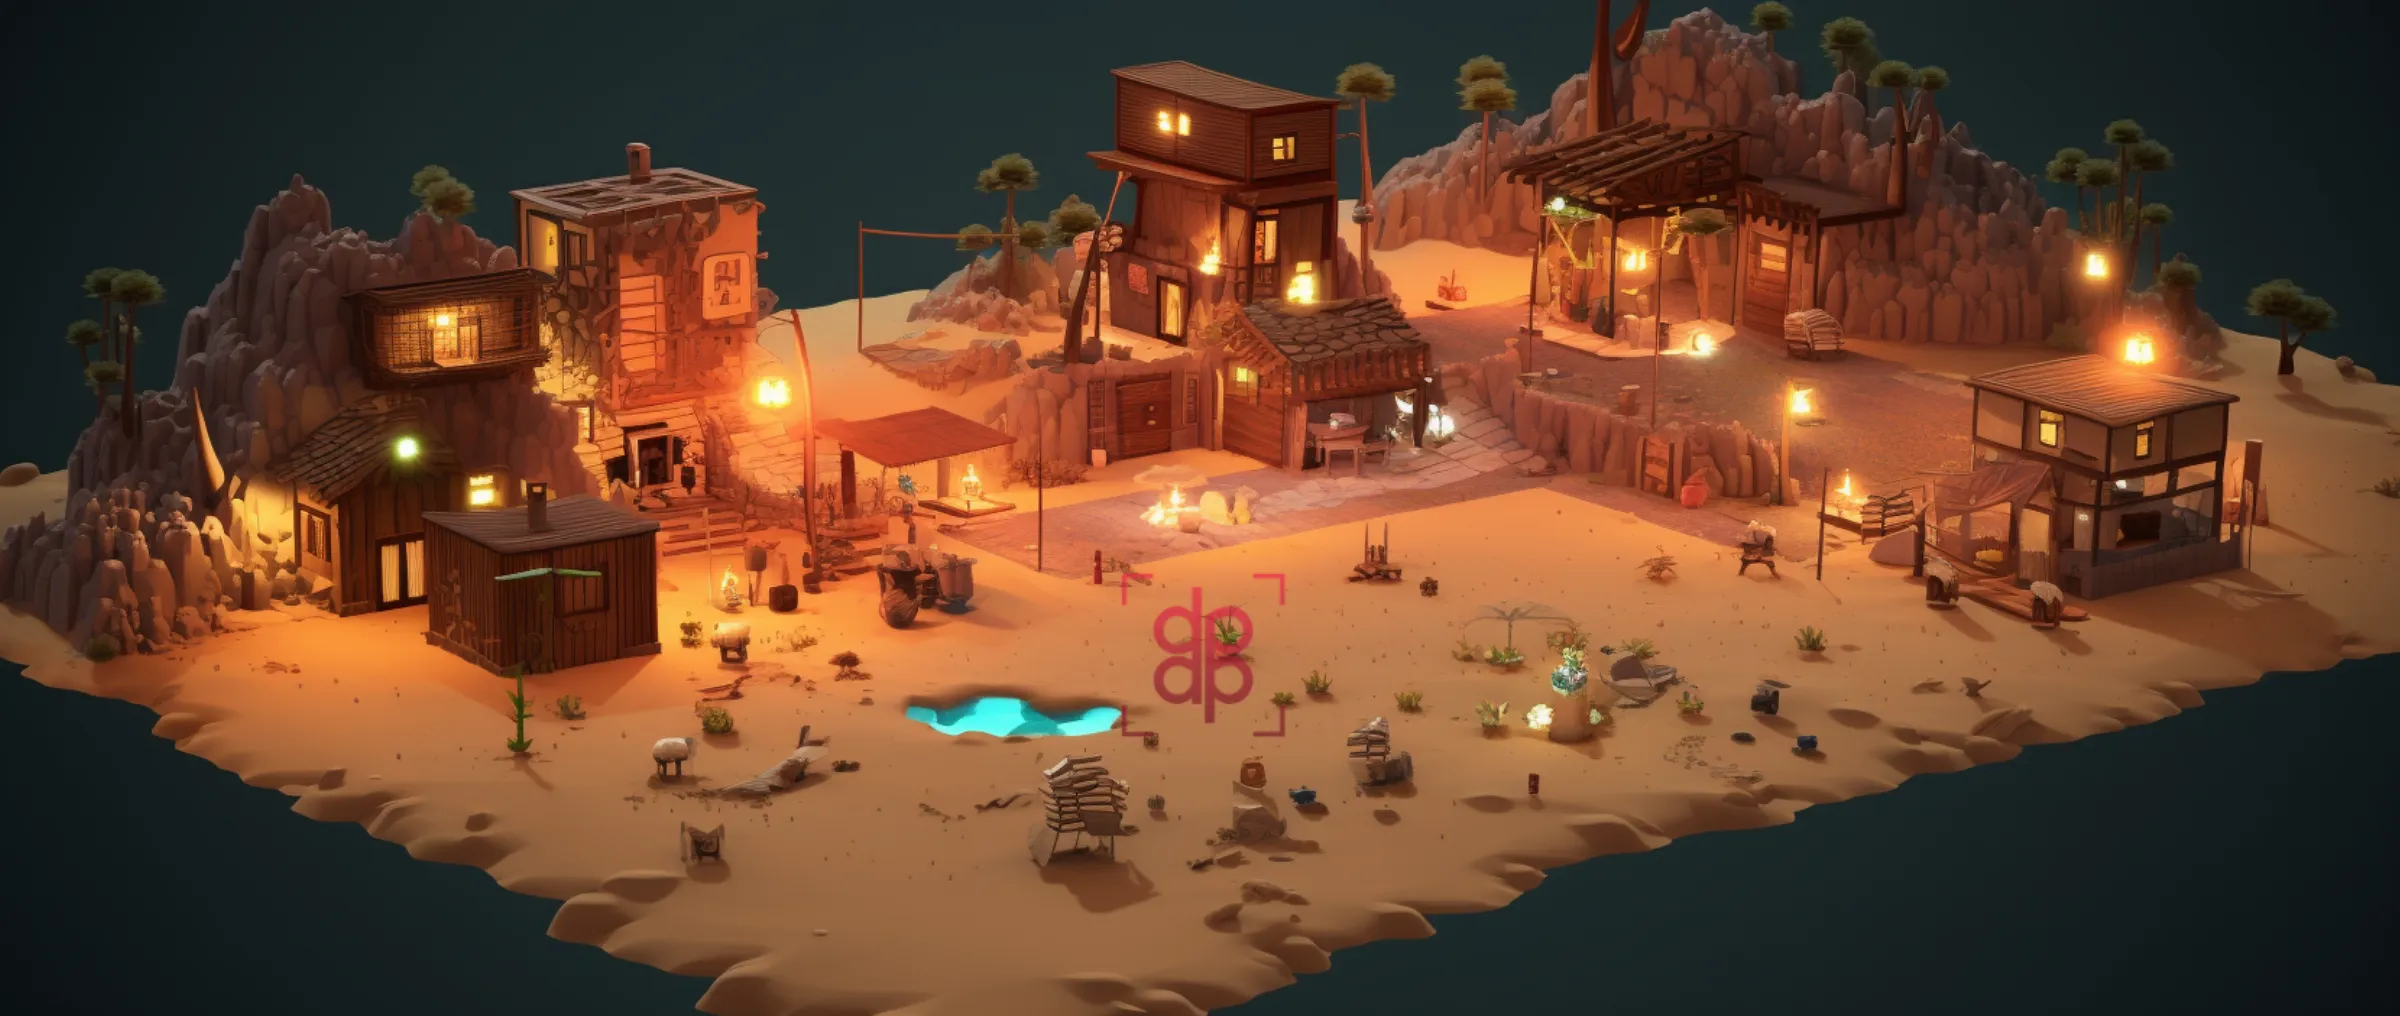 The Sandbox 0.9.7: big update with new gameplay elements